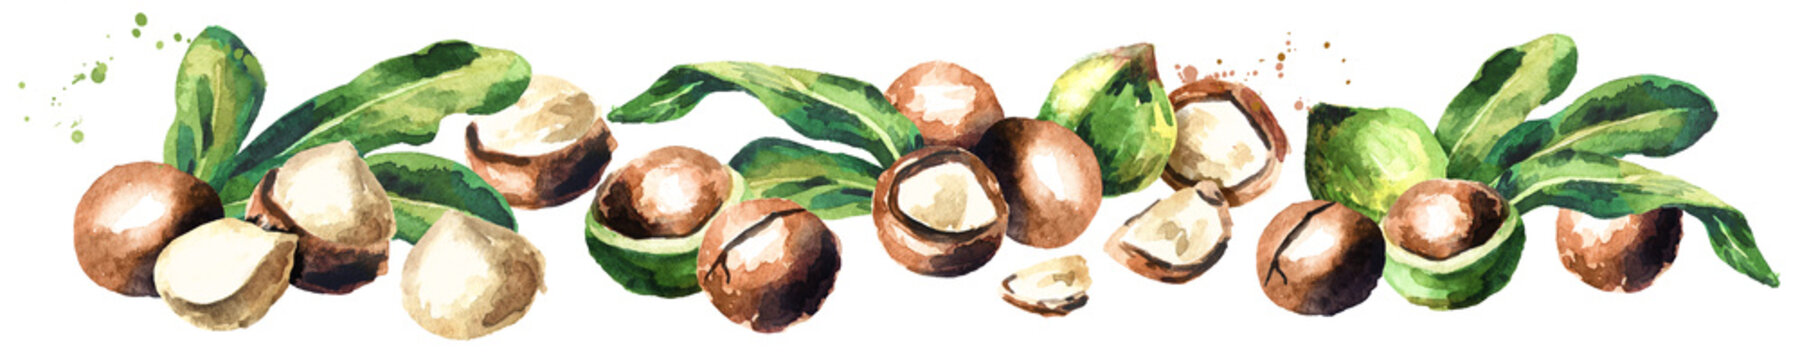 Macadamia nuts panoramic image on white background. Watercolor hand drawn illustration